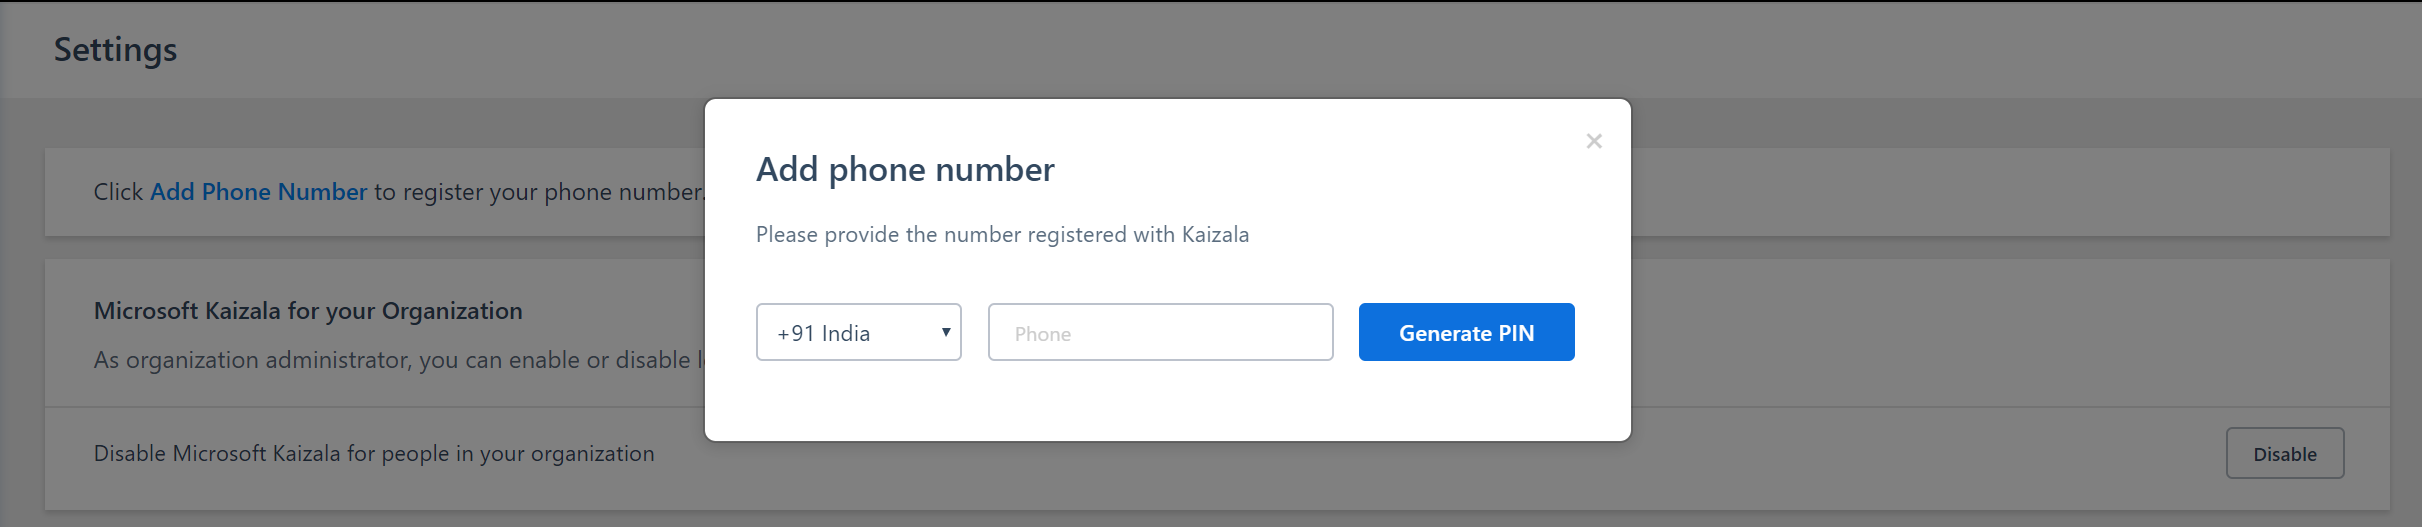 Prompt to add phone number in Kaizala management portal.